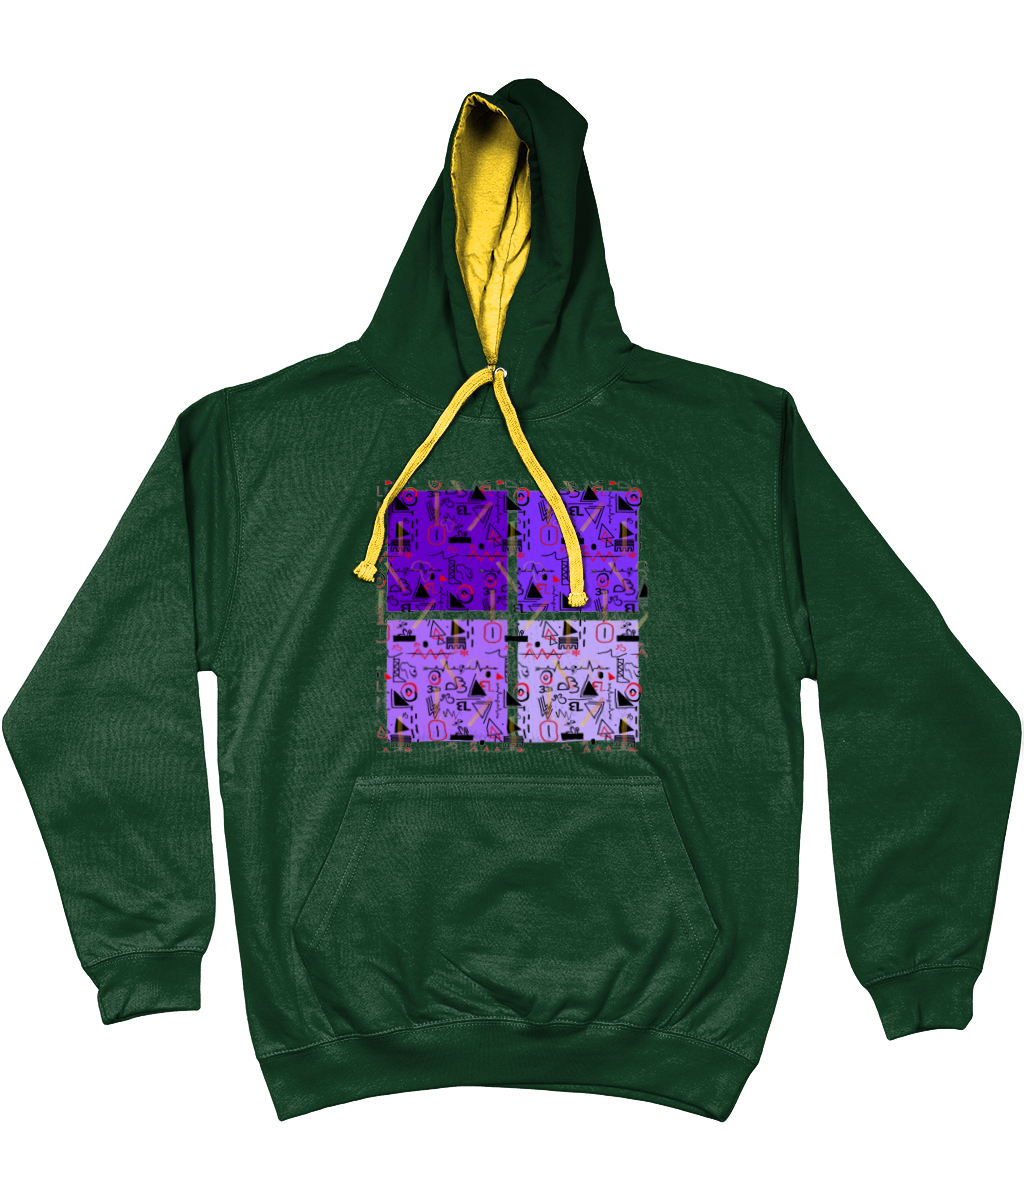 Linear Print Graphic Unisex Hoodie with a contrast hood and string